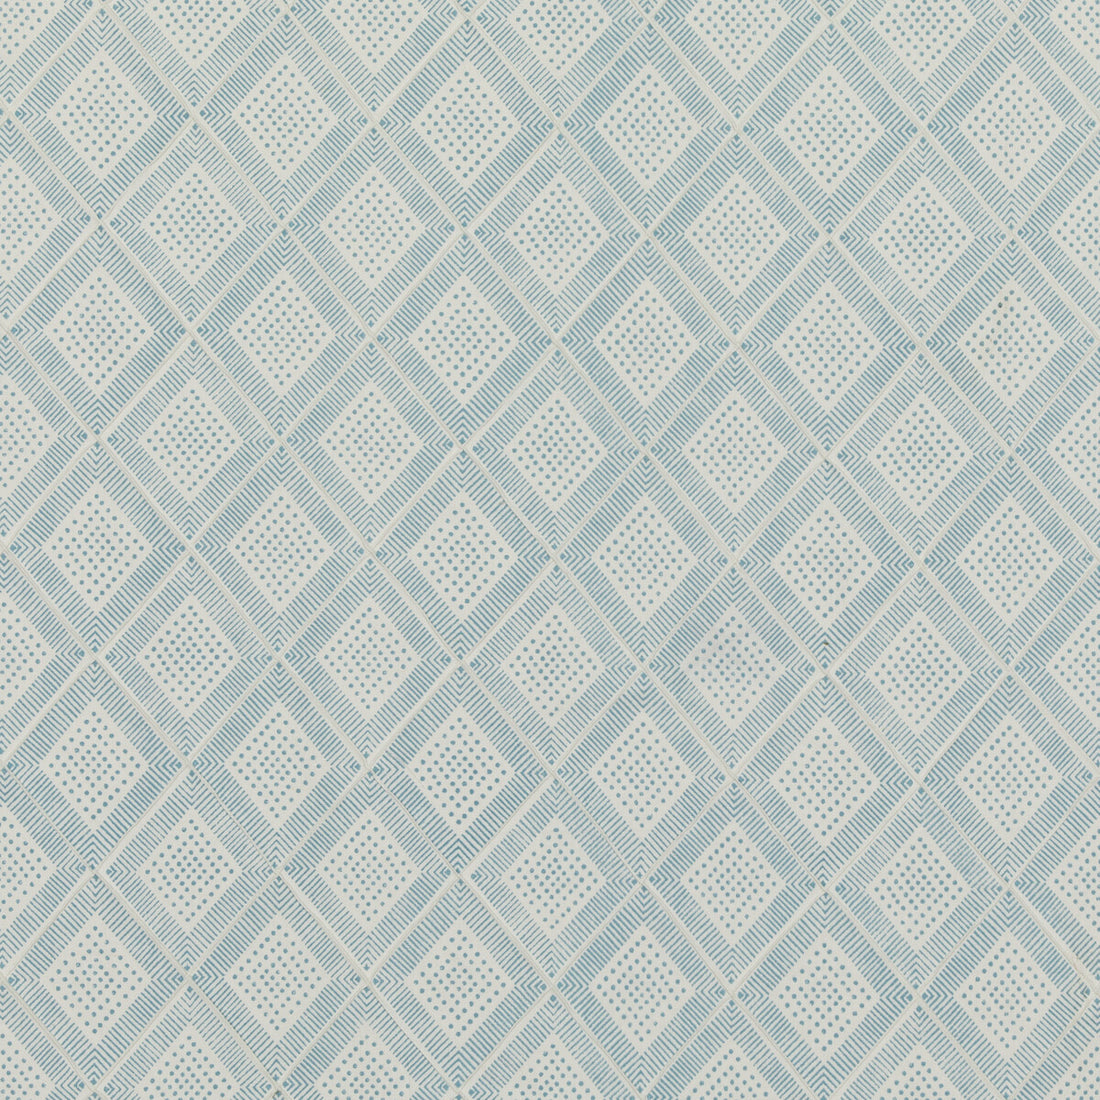 Block Trellis fabric in aqua color - pattern PP50484.3.0 - by Baker Lifestyle in the Block Party collection